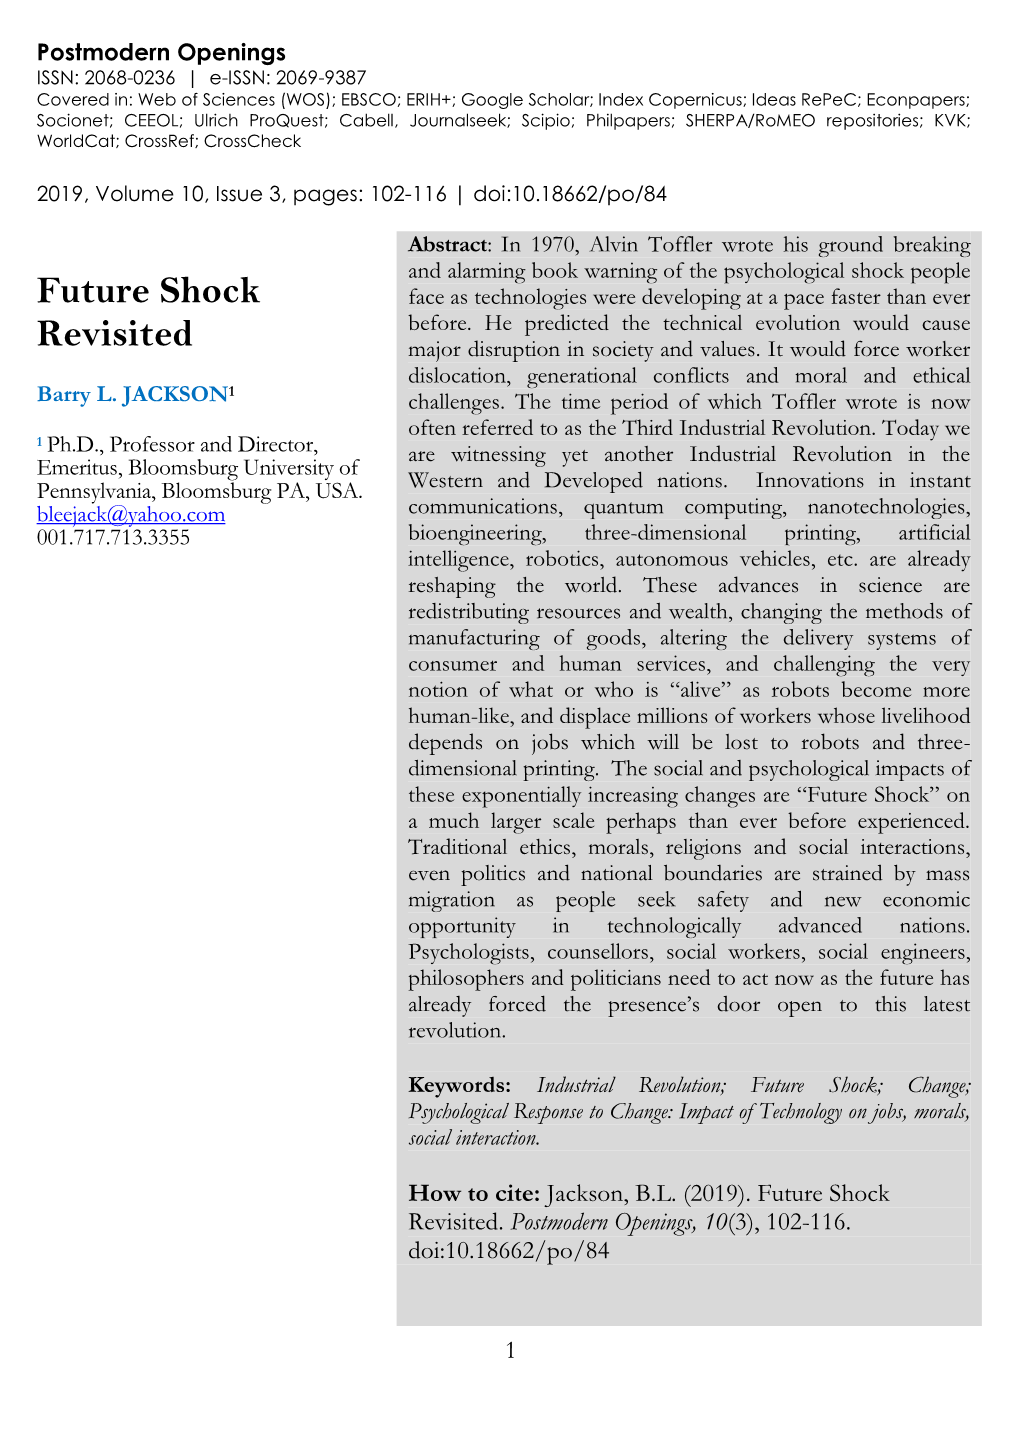 Future Shock Revisited